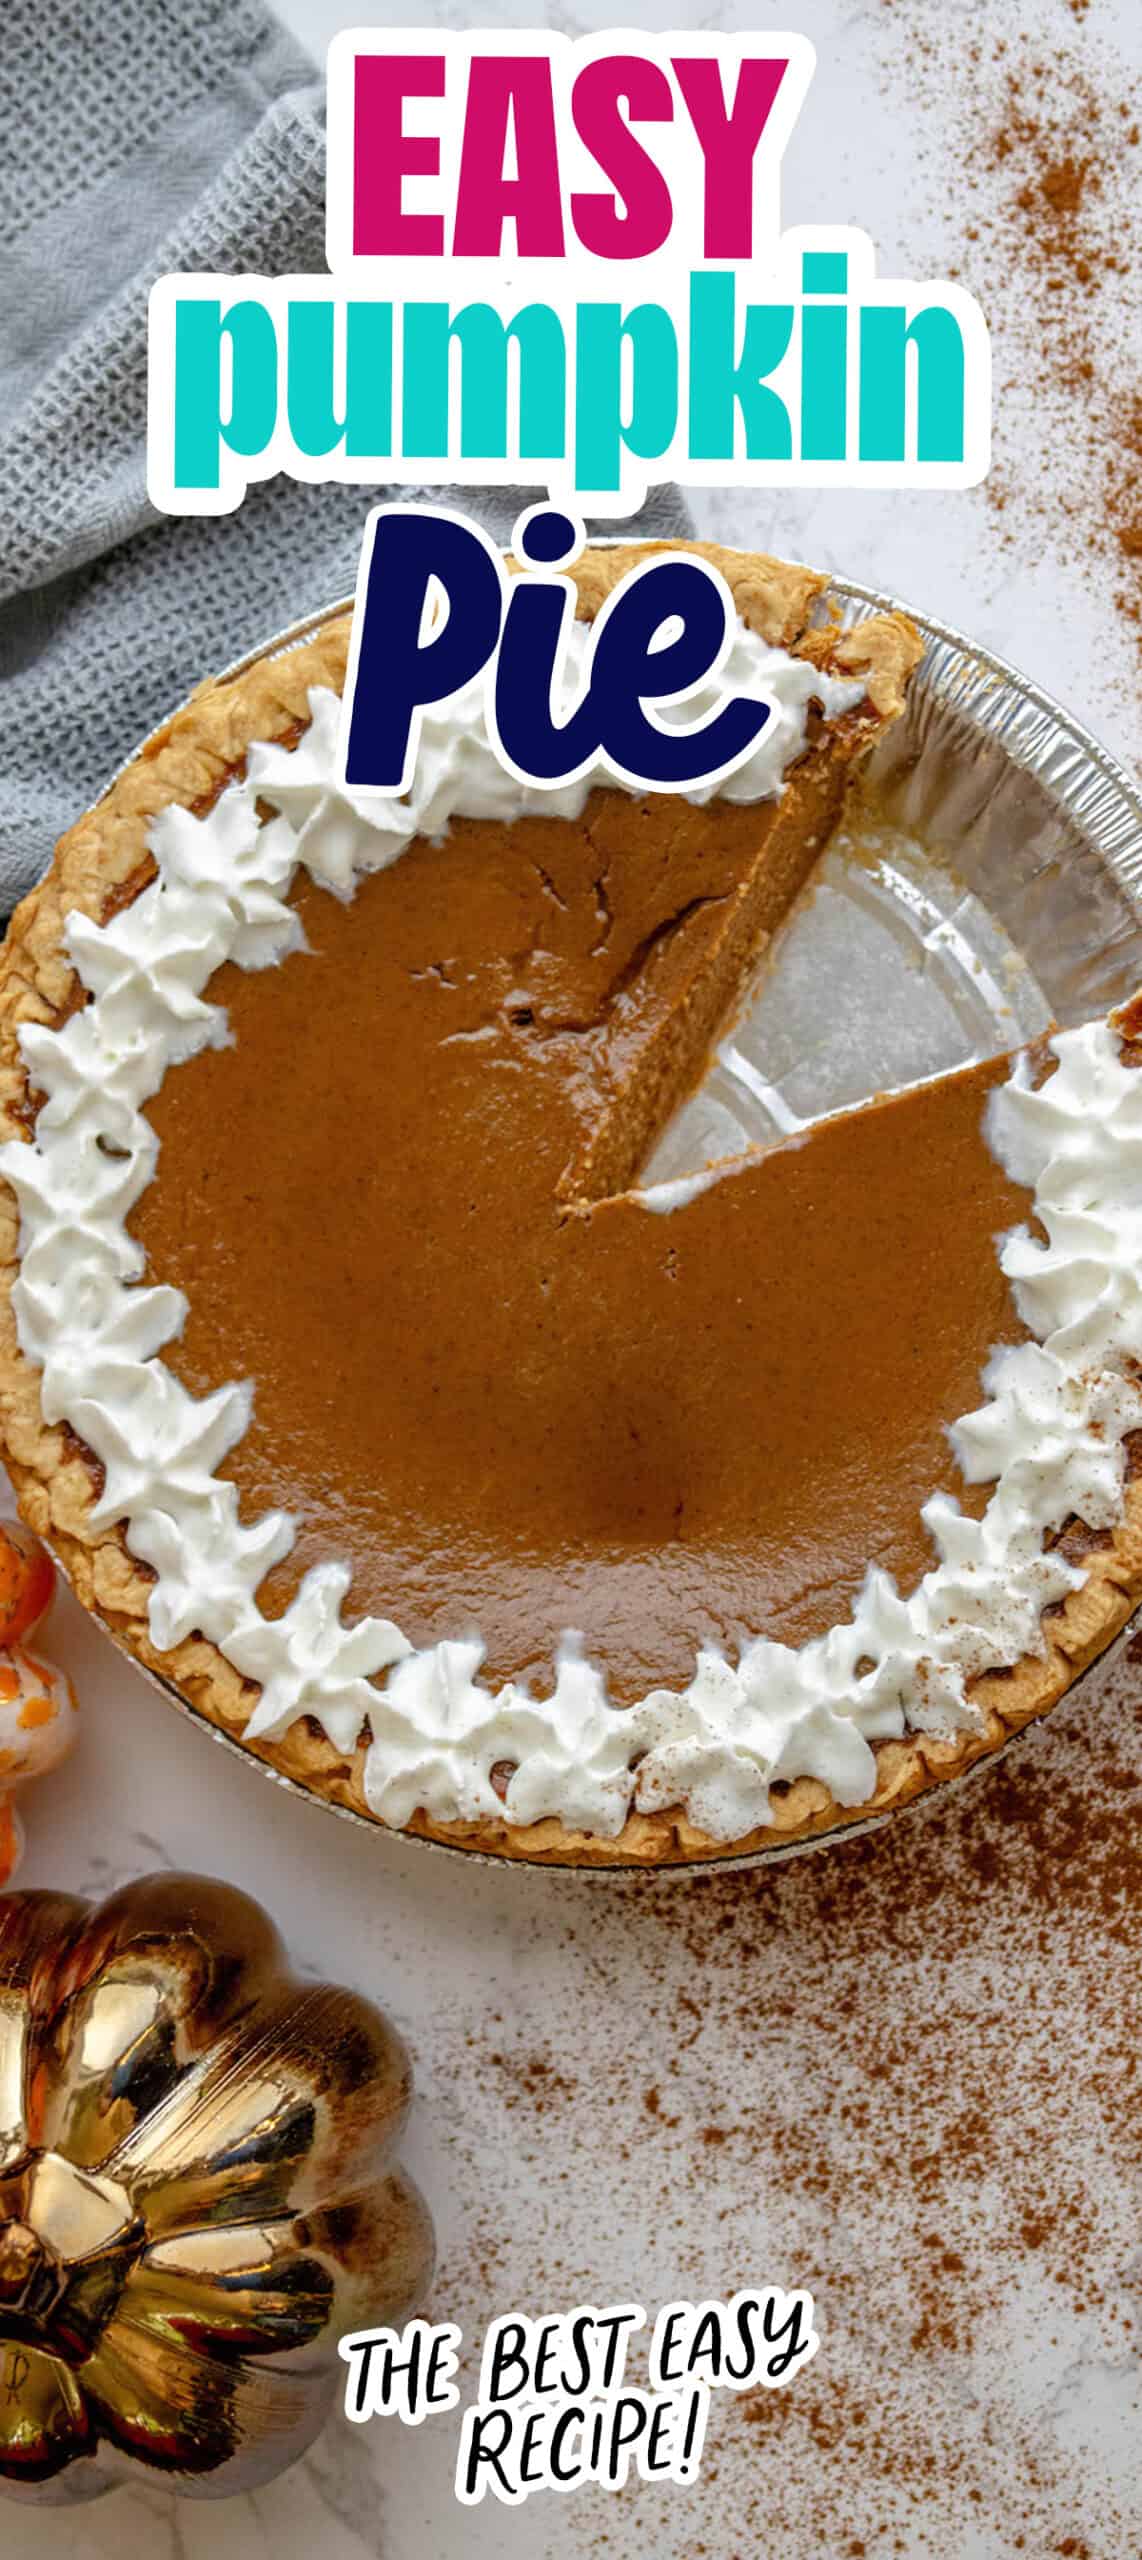 An easy pumpkin pie with a slice taken out.